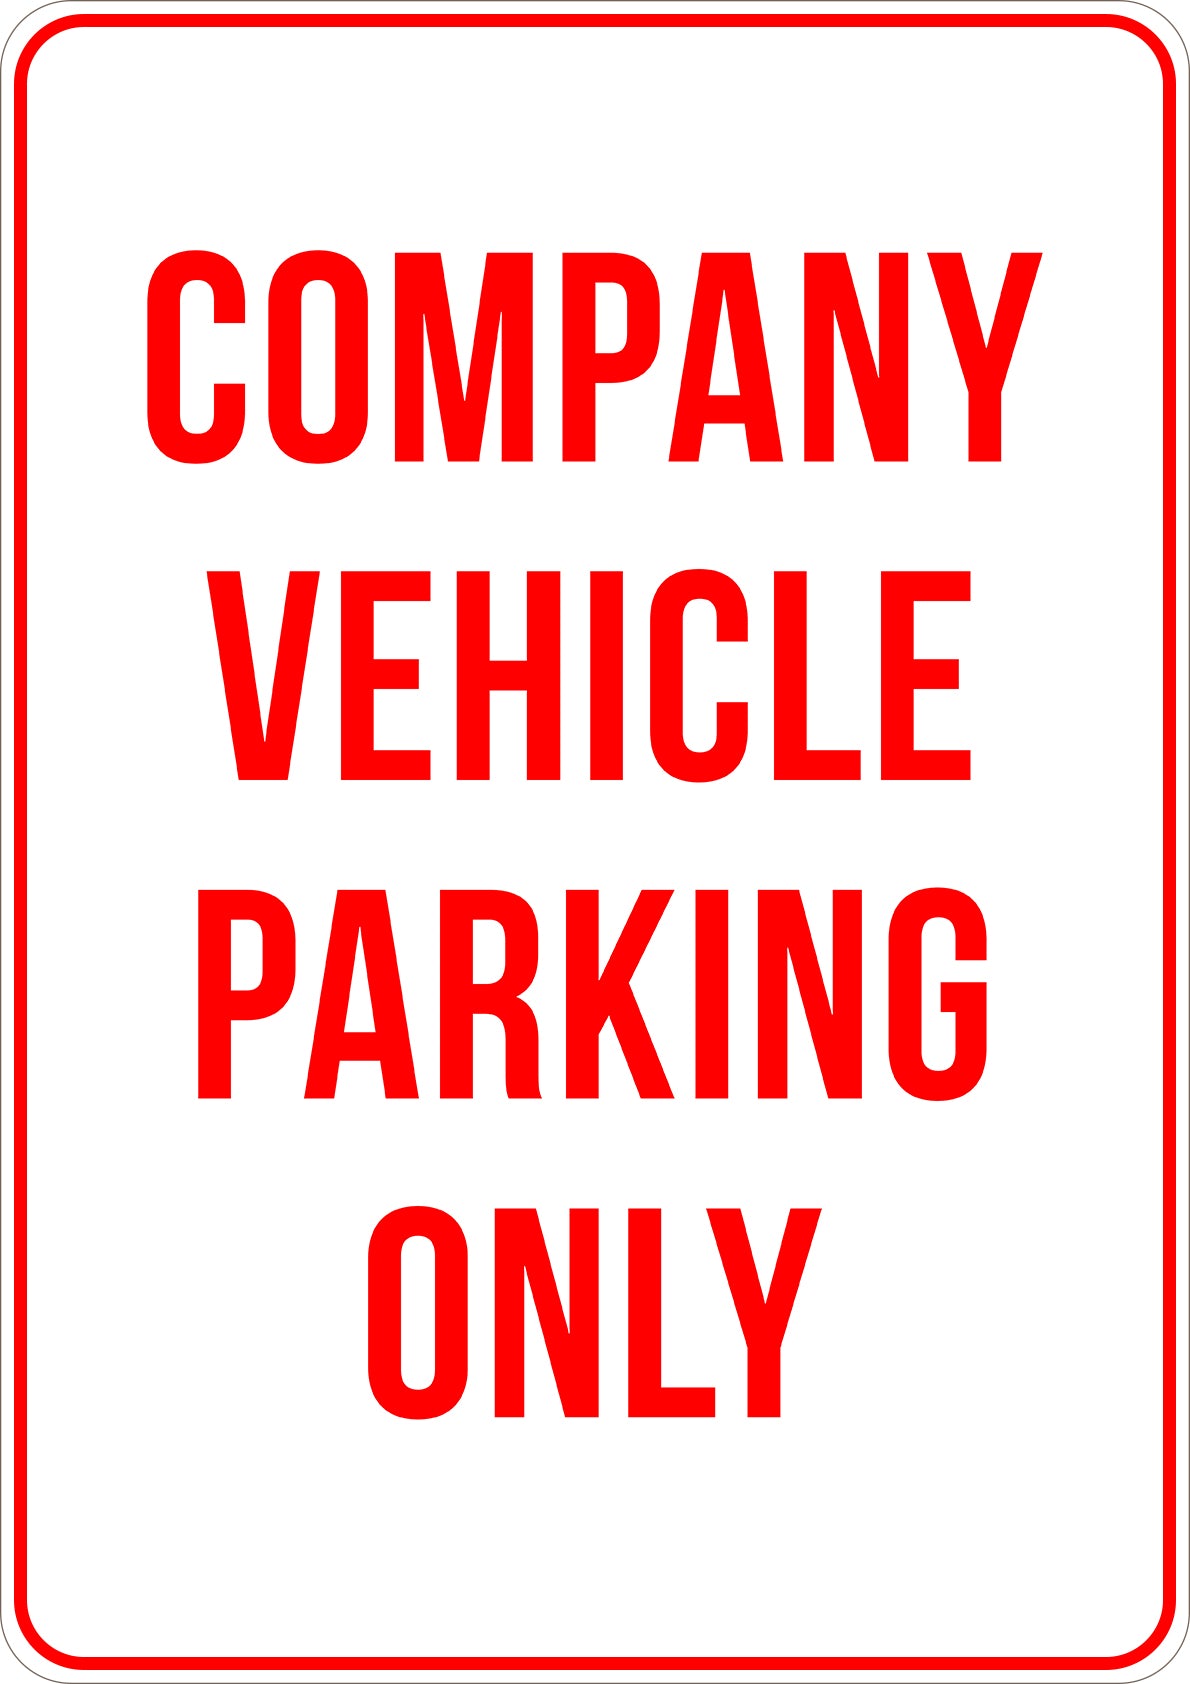 Company Vehicle Parking Only Printed Sign